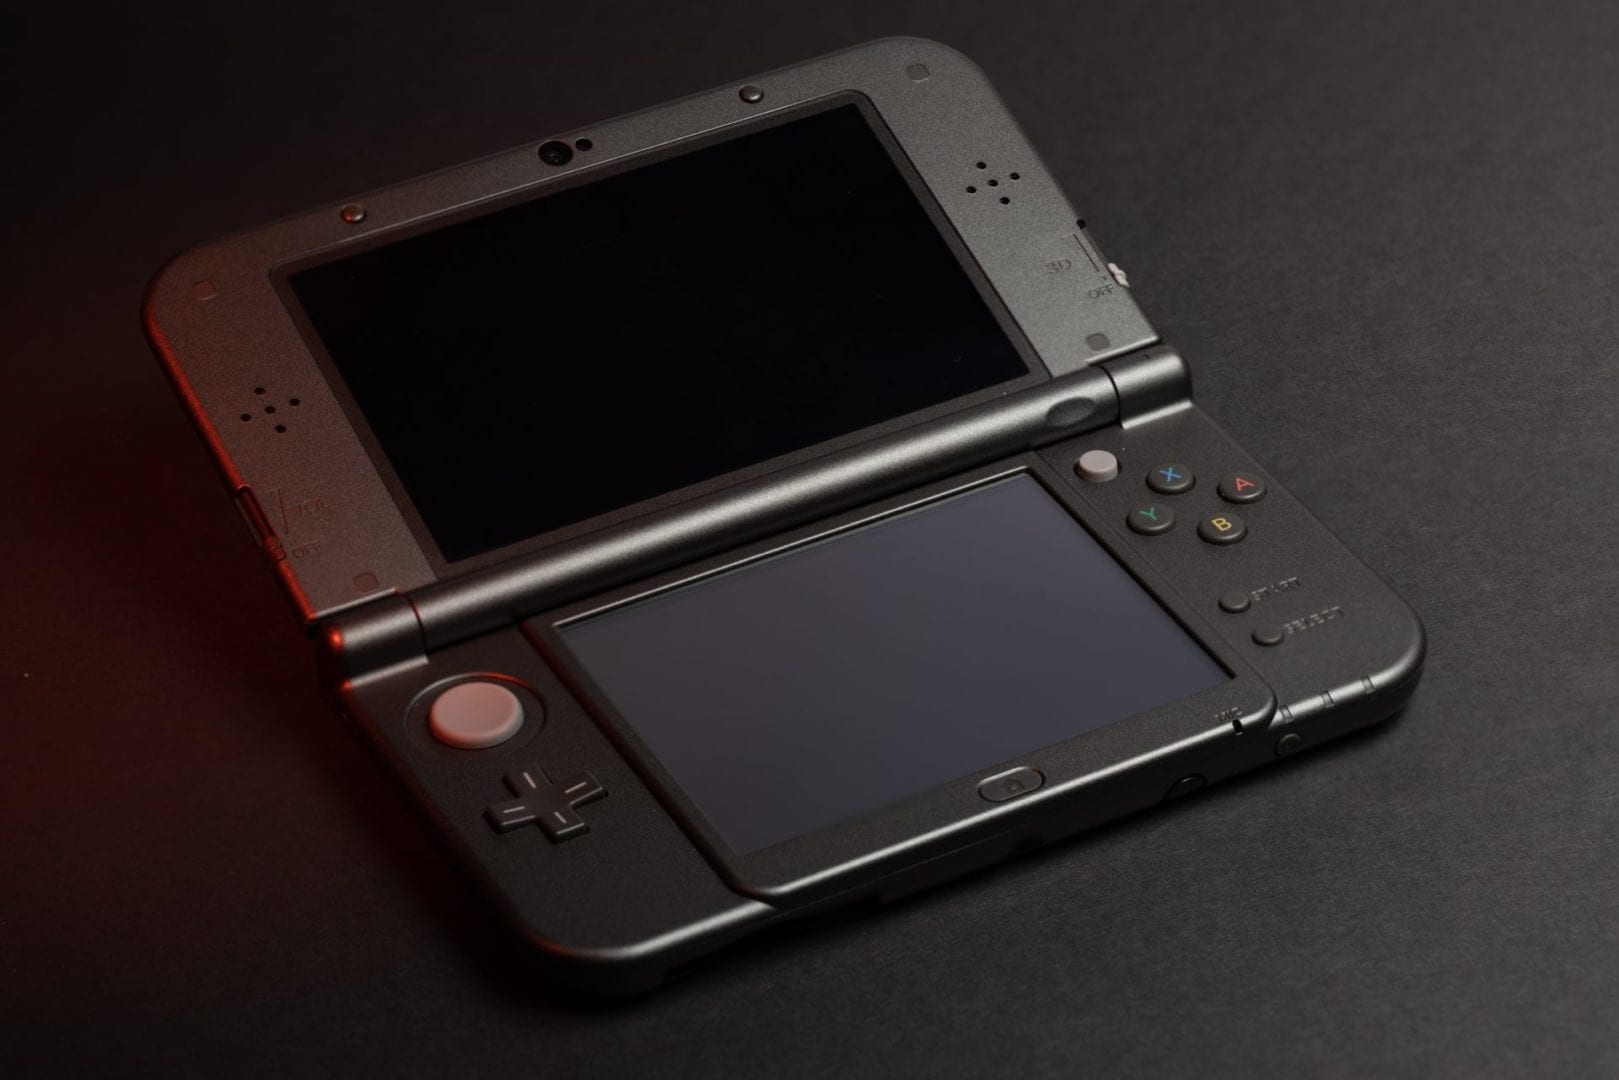 The Nintendo 3DS Just Got New System Update, Nearly a Year After the Last One